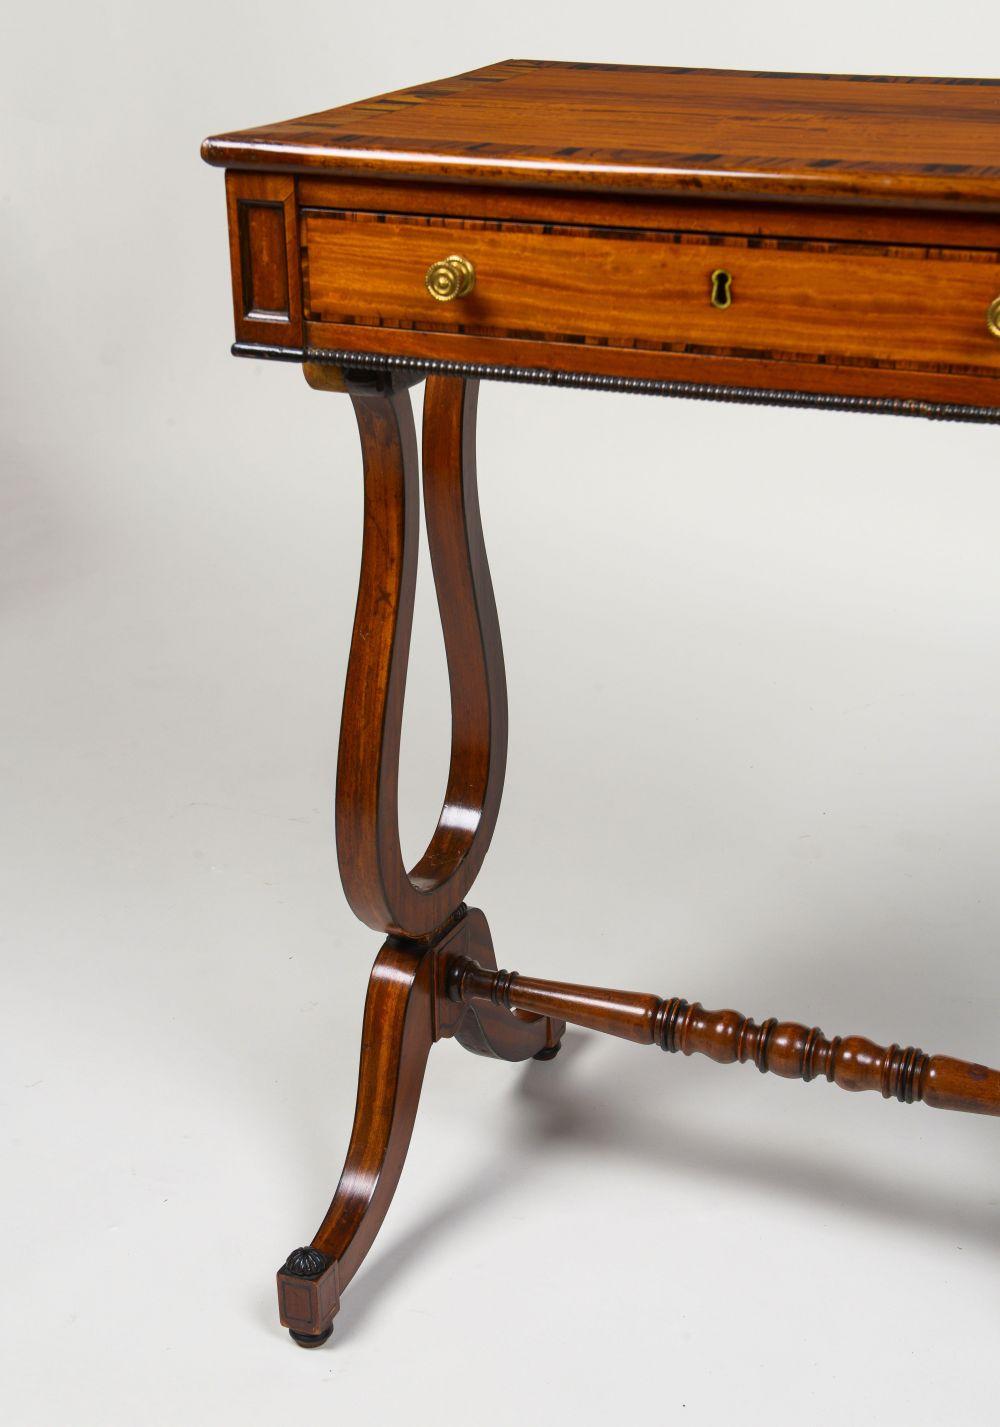 Early 19th Century A Fine Regency Satinwood and Calamander Work Table For Sale